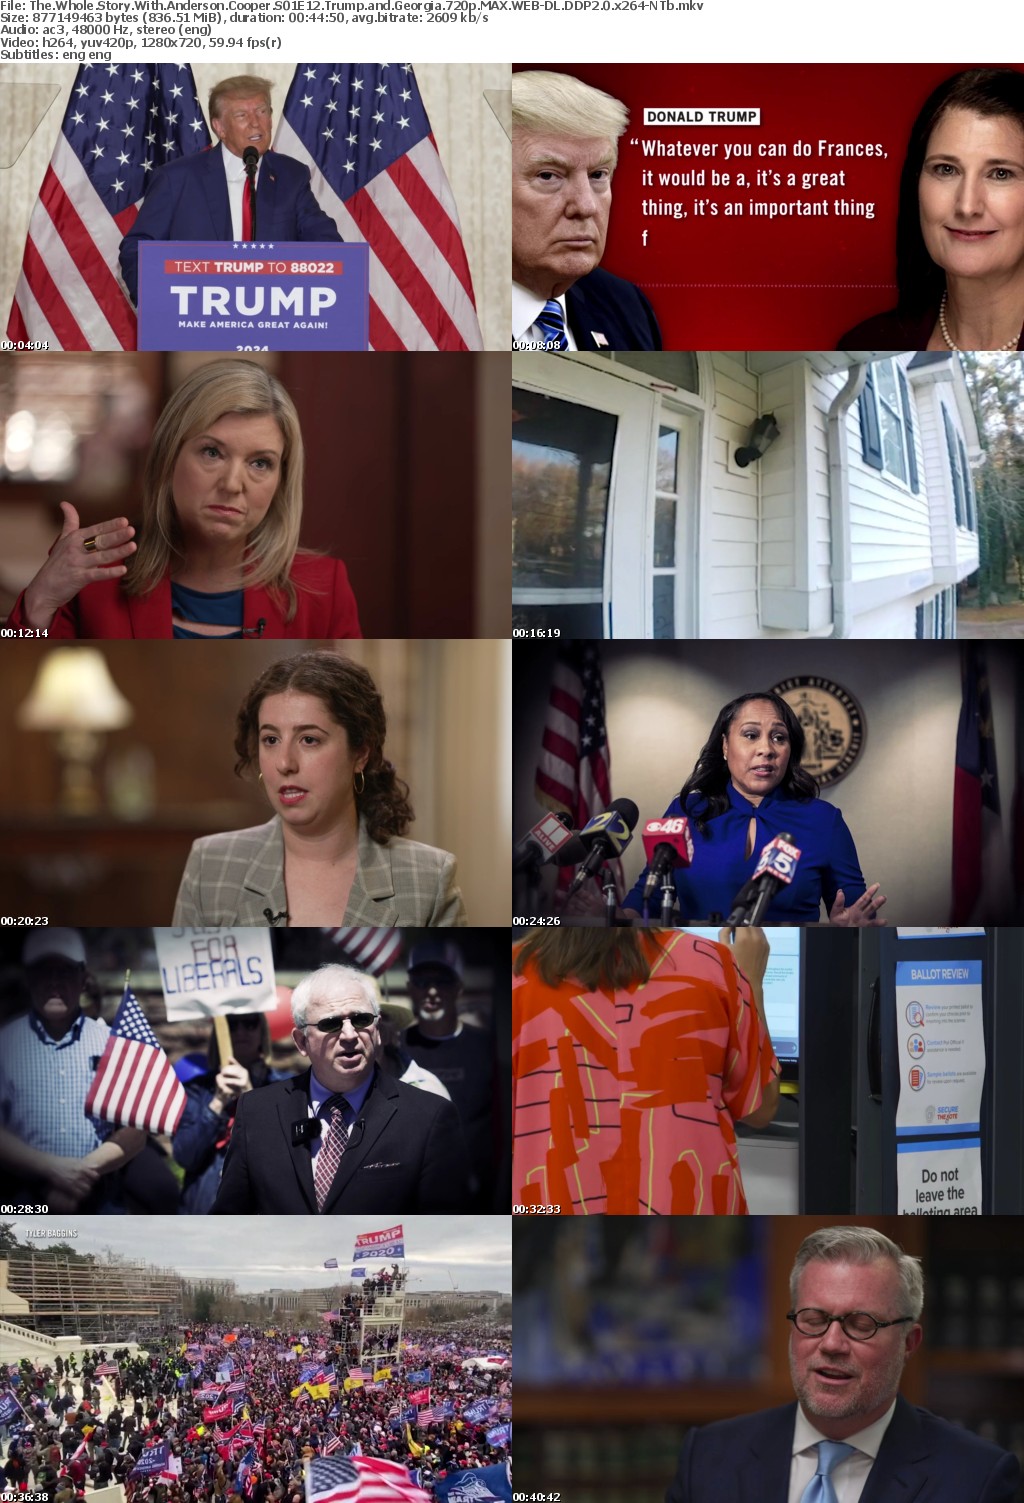 The Whole Story With Anderson Cooper S01E12 Trump and Georgia 720p MAX WEB-DL DDP2 0 x264-NTb